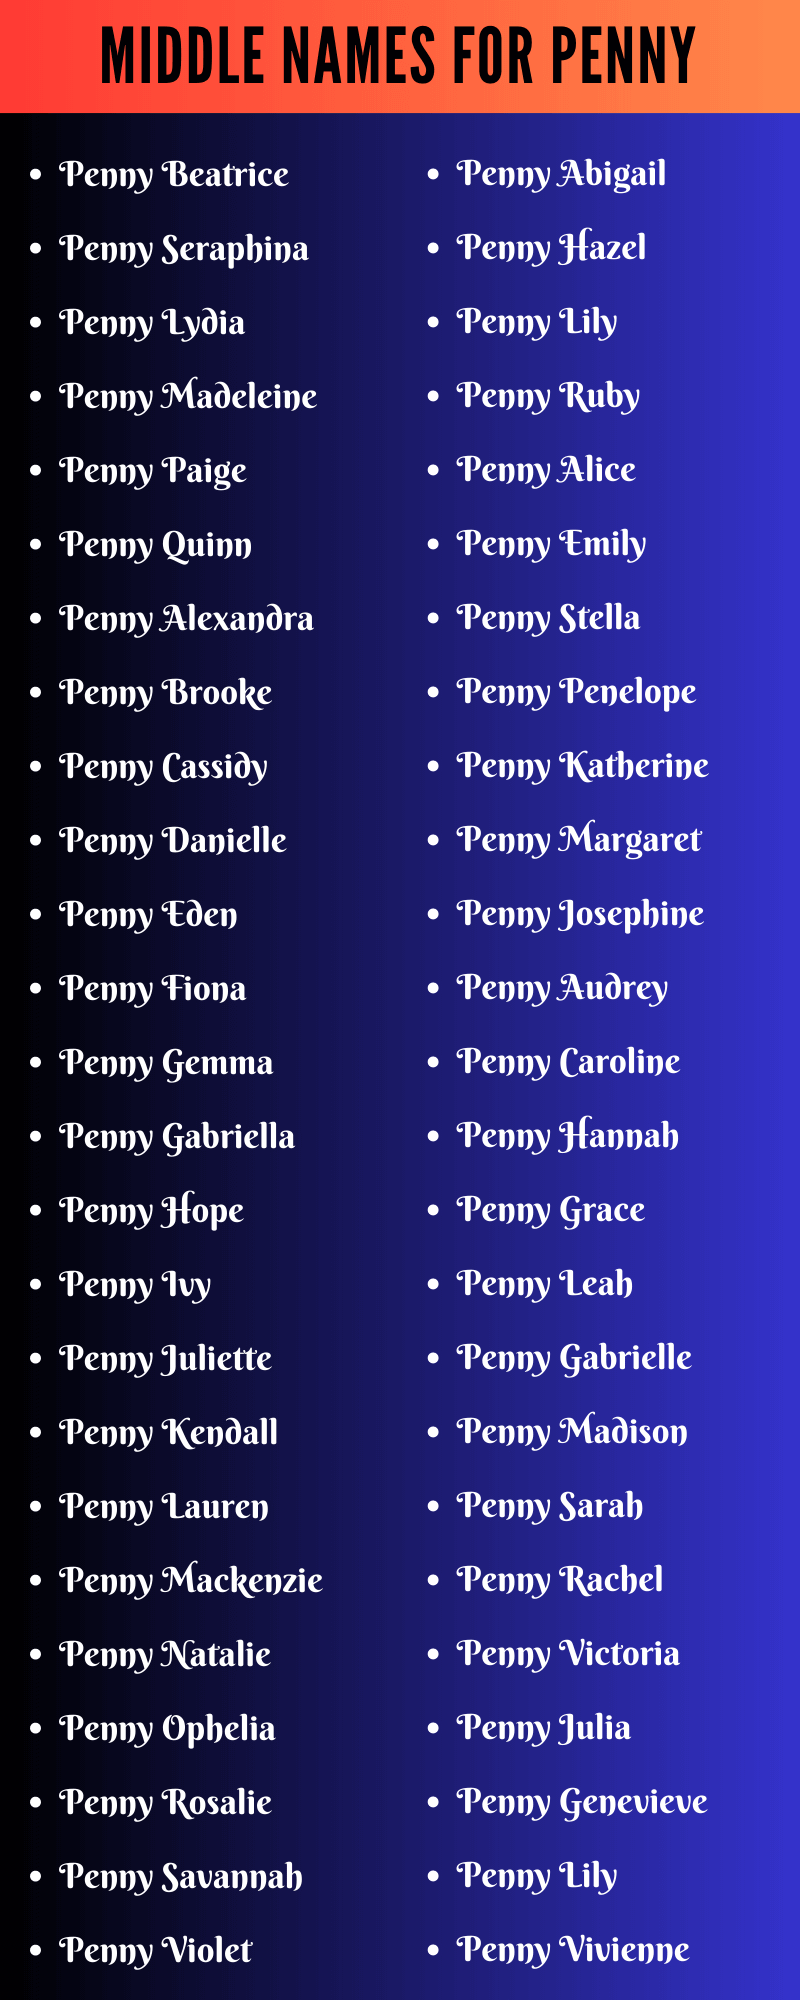 Middle Names For Penny